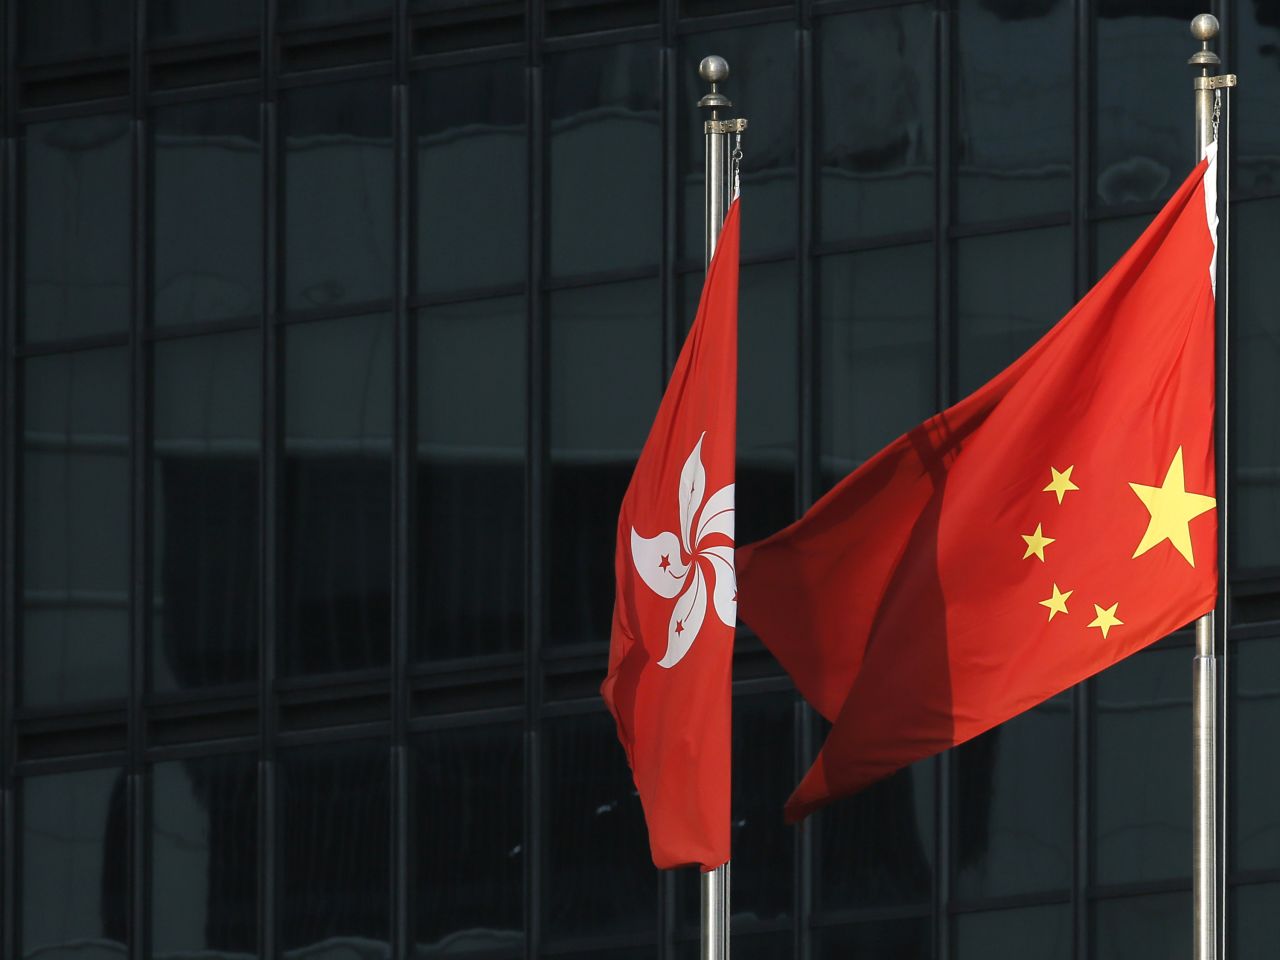 Protesters turn the Chinese flag upside-down on September 29 outside a commercial building near the main Occupy Central protest area in Hong Kong.